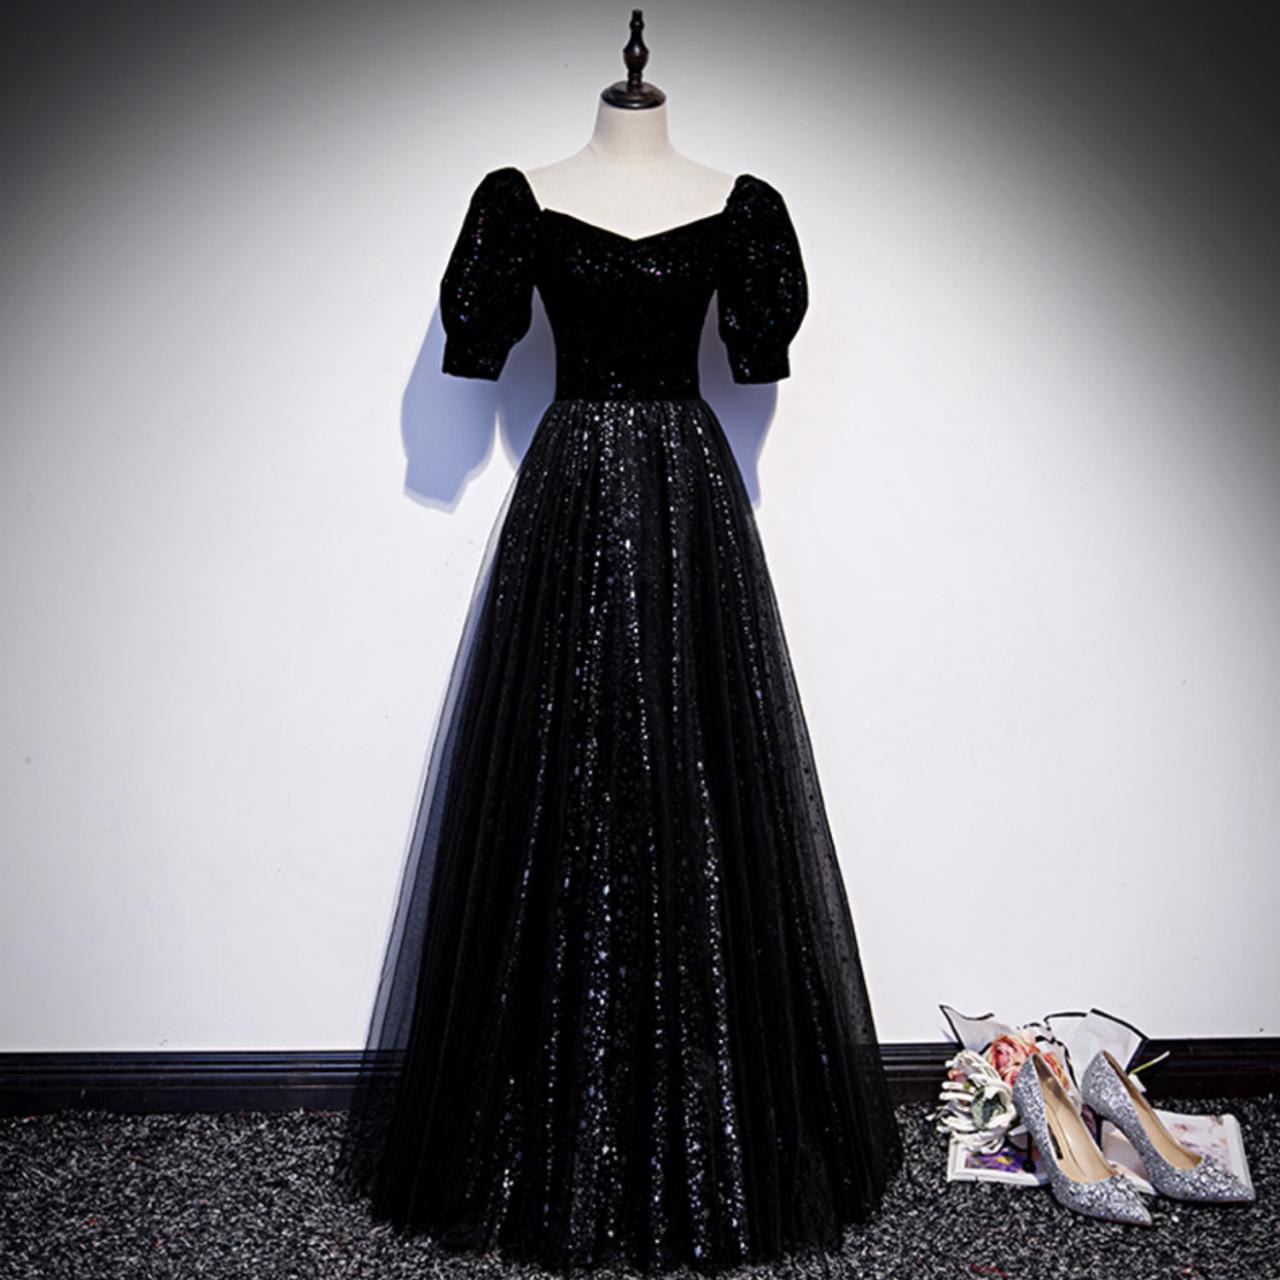 Black Glitter Sequins Prom Dress Princess Long With Short Sleeves Sparkly Formal Evening Dress Prom Gown